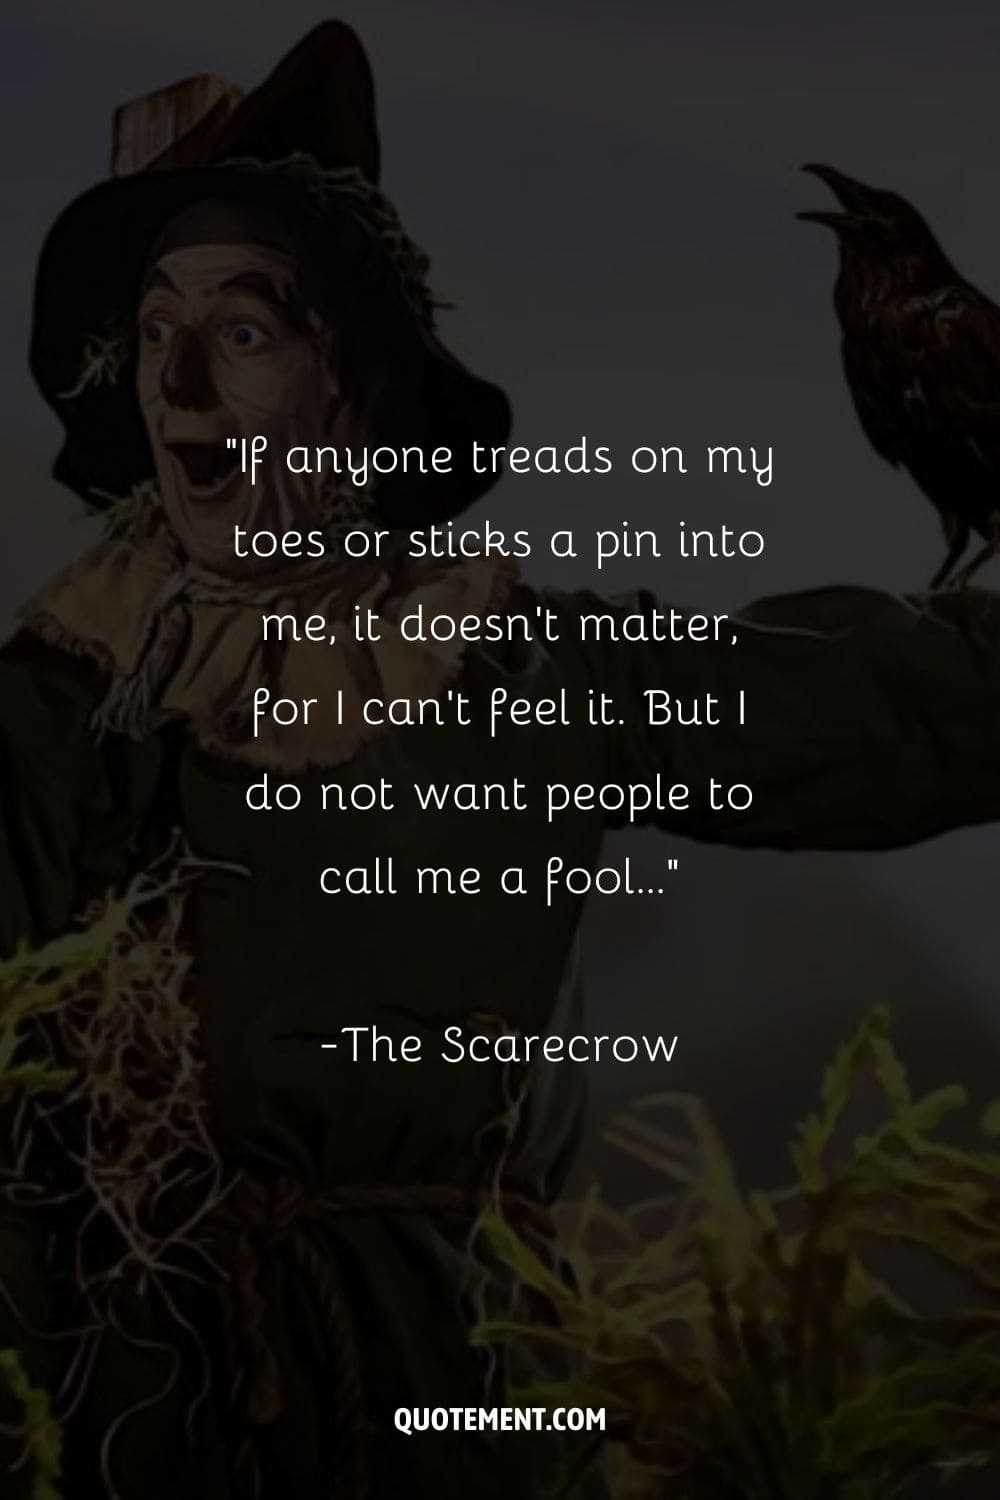 Scarecrow in awe, mouth open in wonder representing The Wizard of Oz Scarecrow quote
